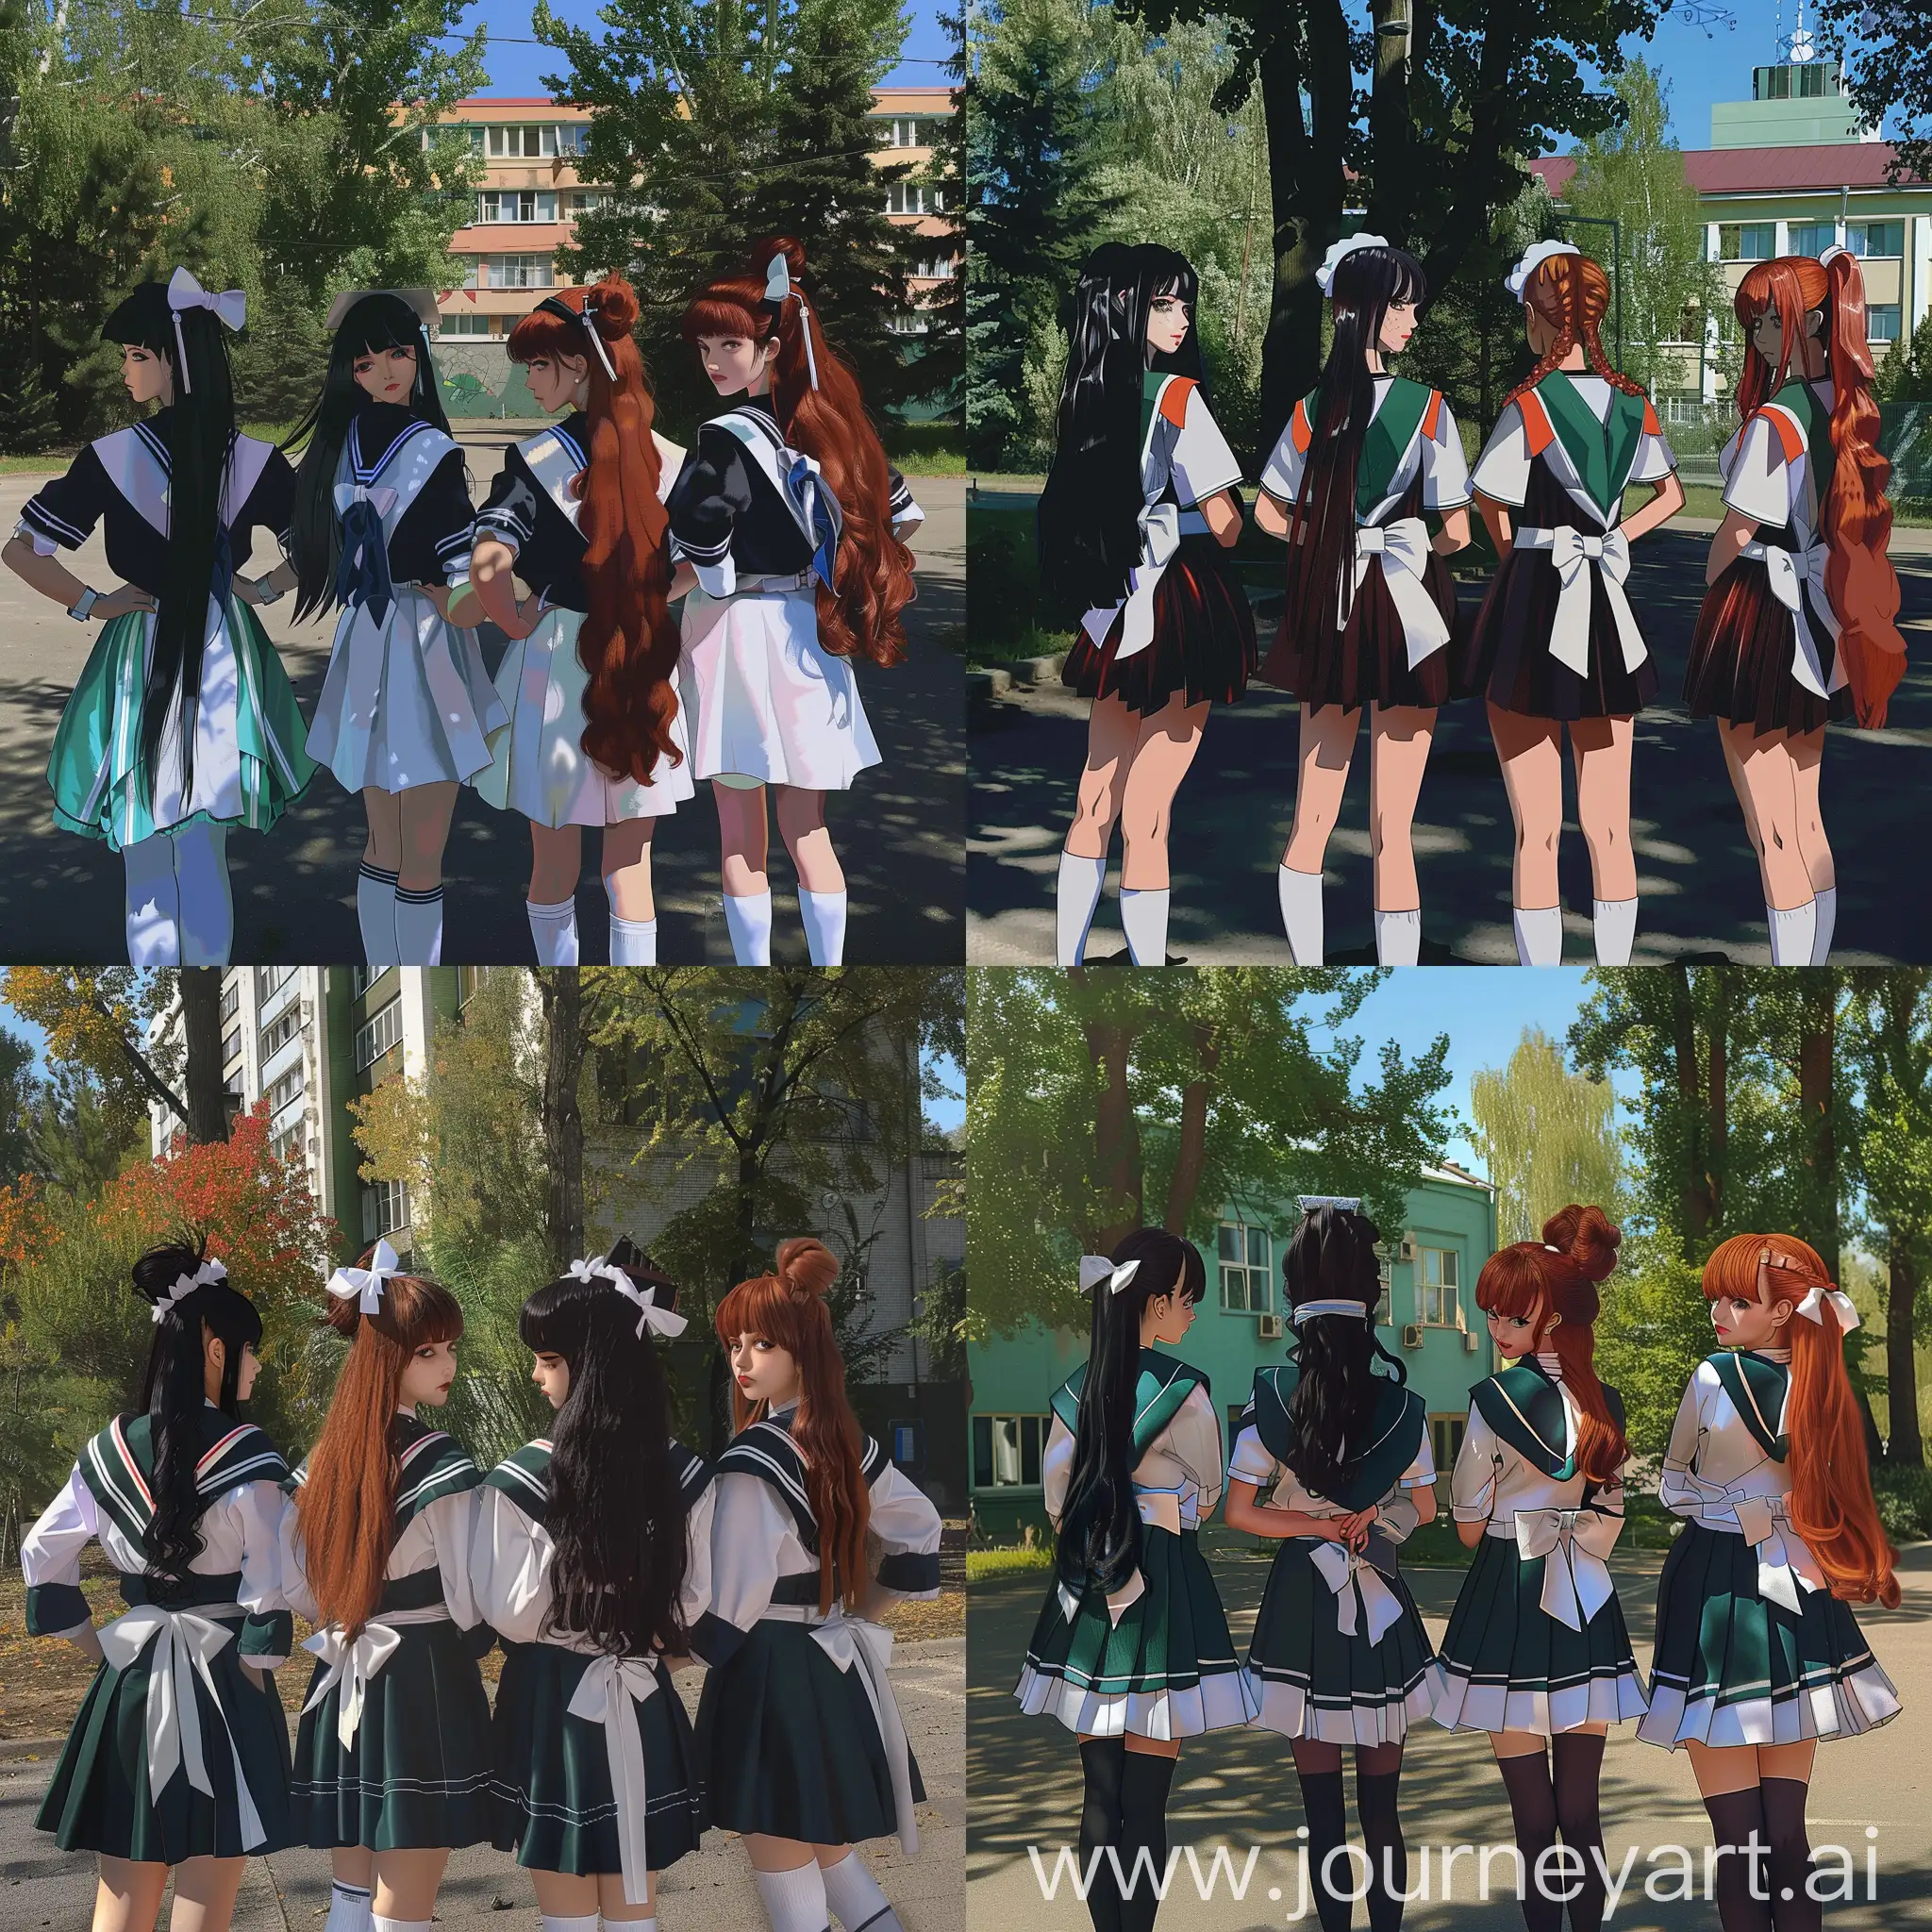 { "prompt": "Four girls standing in a JoJo's Bizarre Adventure style pose, outdoors with trees and a building in the background. Each girl is wearing a russian graduation school uniform, similar to the provided image. The first girl has long black hair, the second girl has dark hair in a bun with a white bow, the third girl has long red hair, and the fourth girl has long brown hair. The scene is bright and colorful, capturing the exaggerated and dramatic flair of JoJo's Bizarre Adventure.", "size": "1792x1024" }